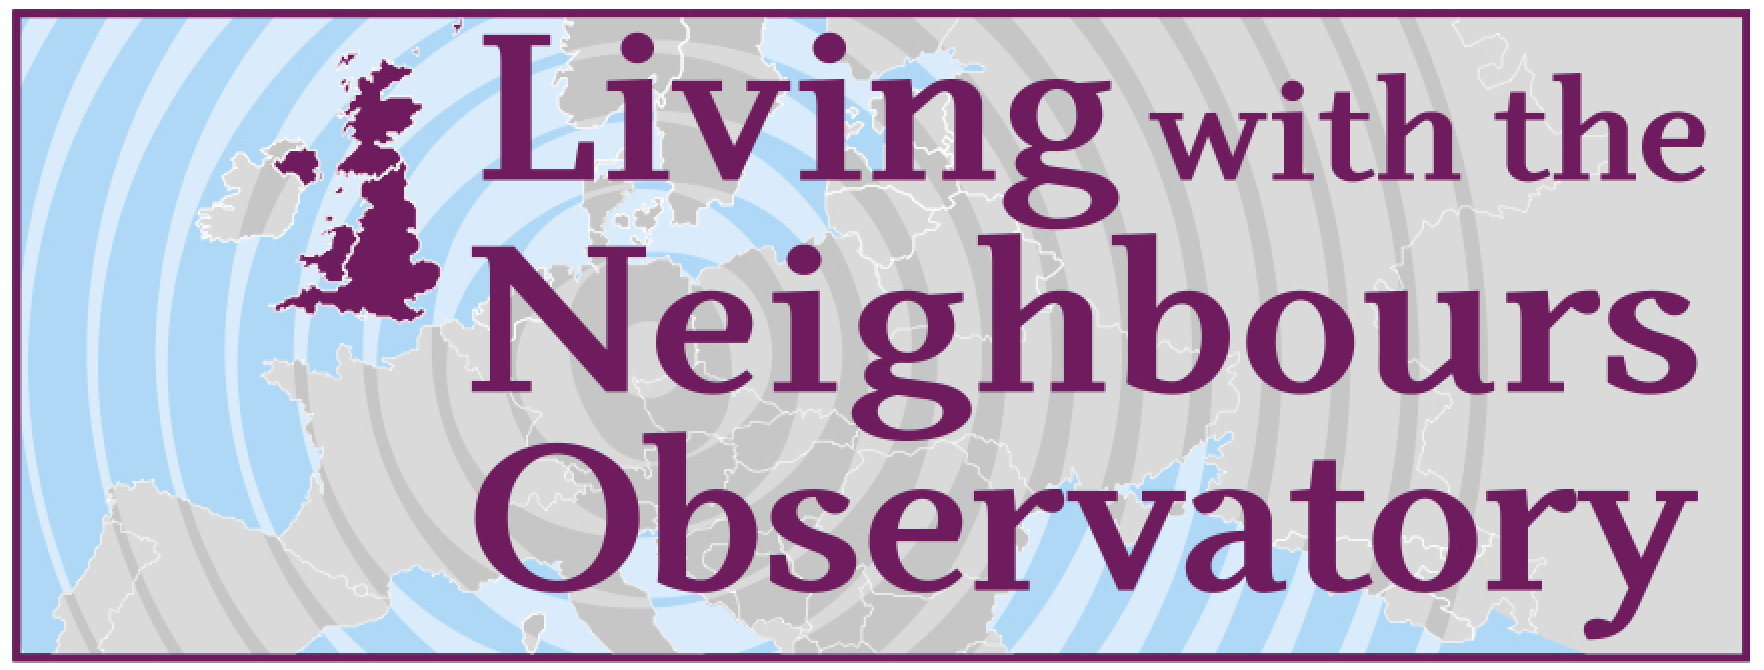 Living with the neighbours observatory logo